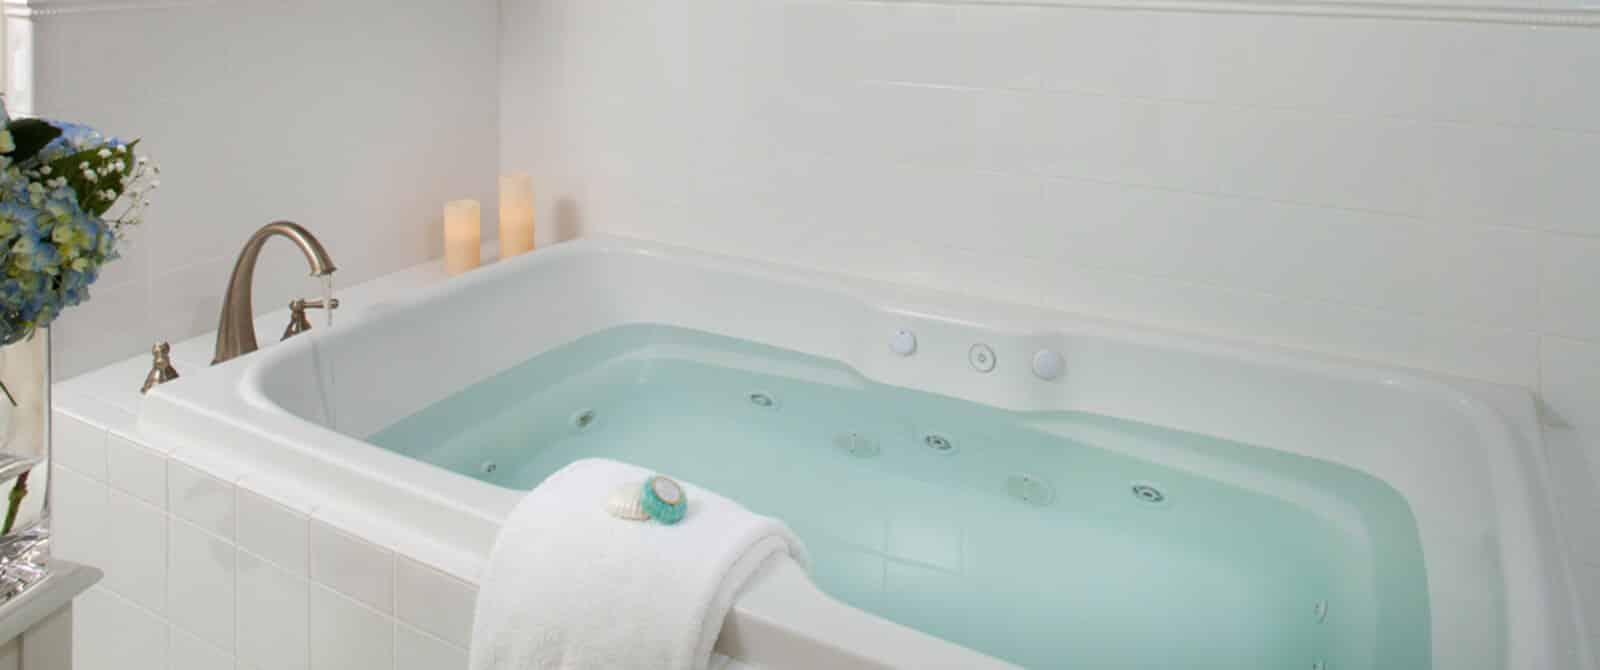 Large, white jet tub filled with water with candles and a folded white towel